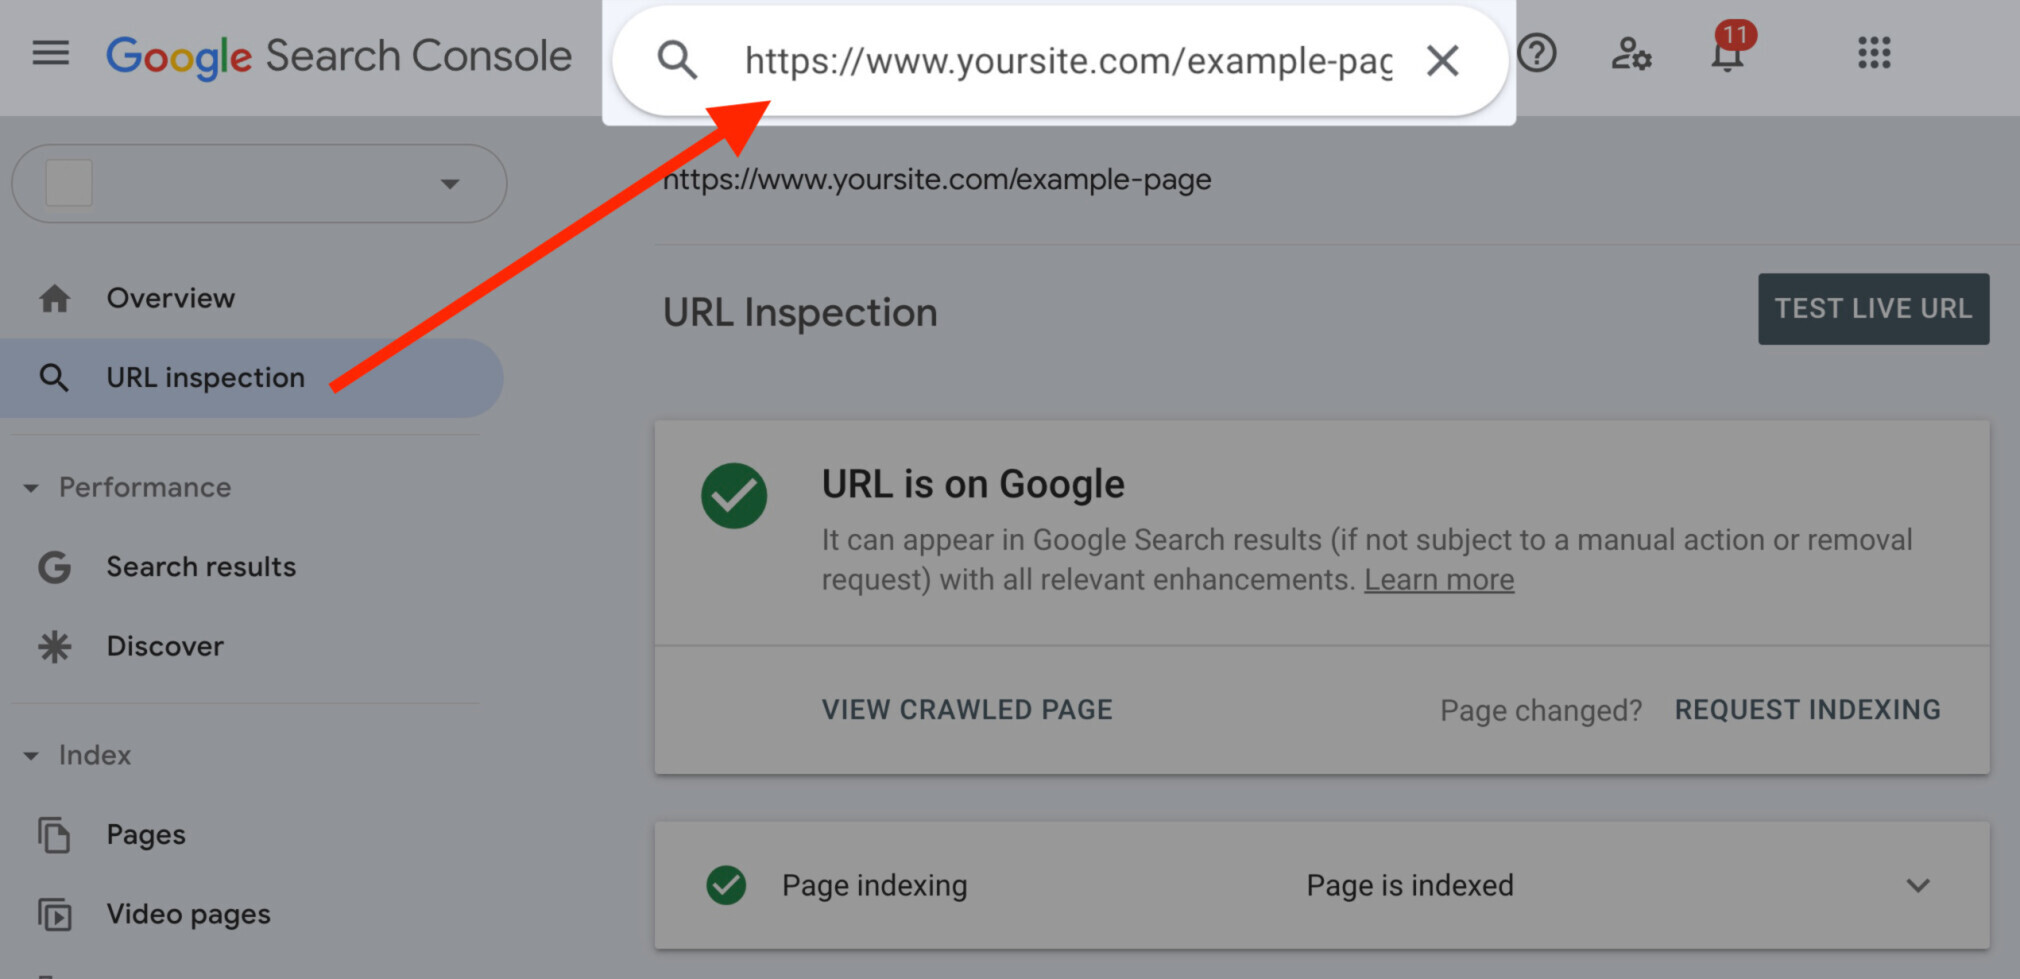 Search console's URL inspection tool